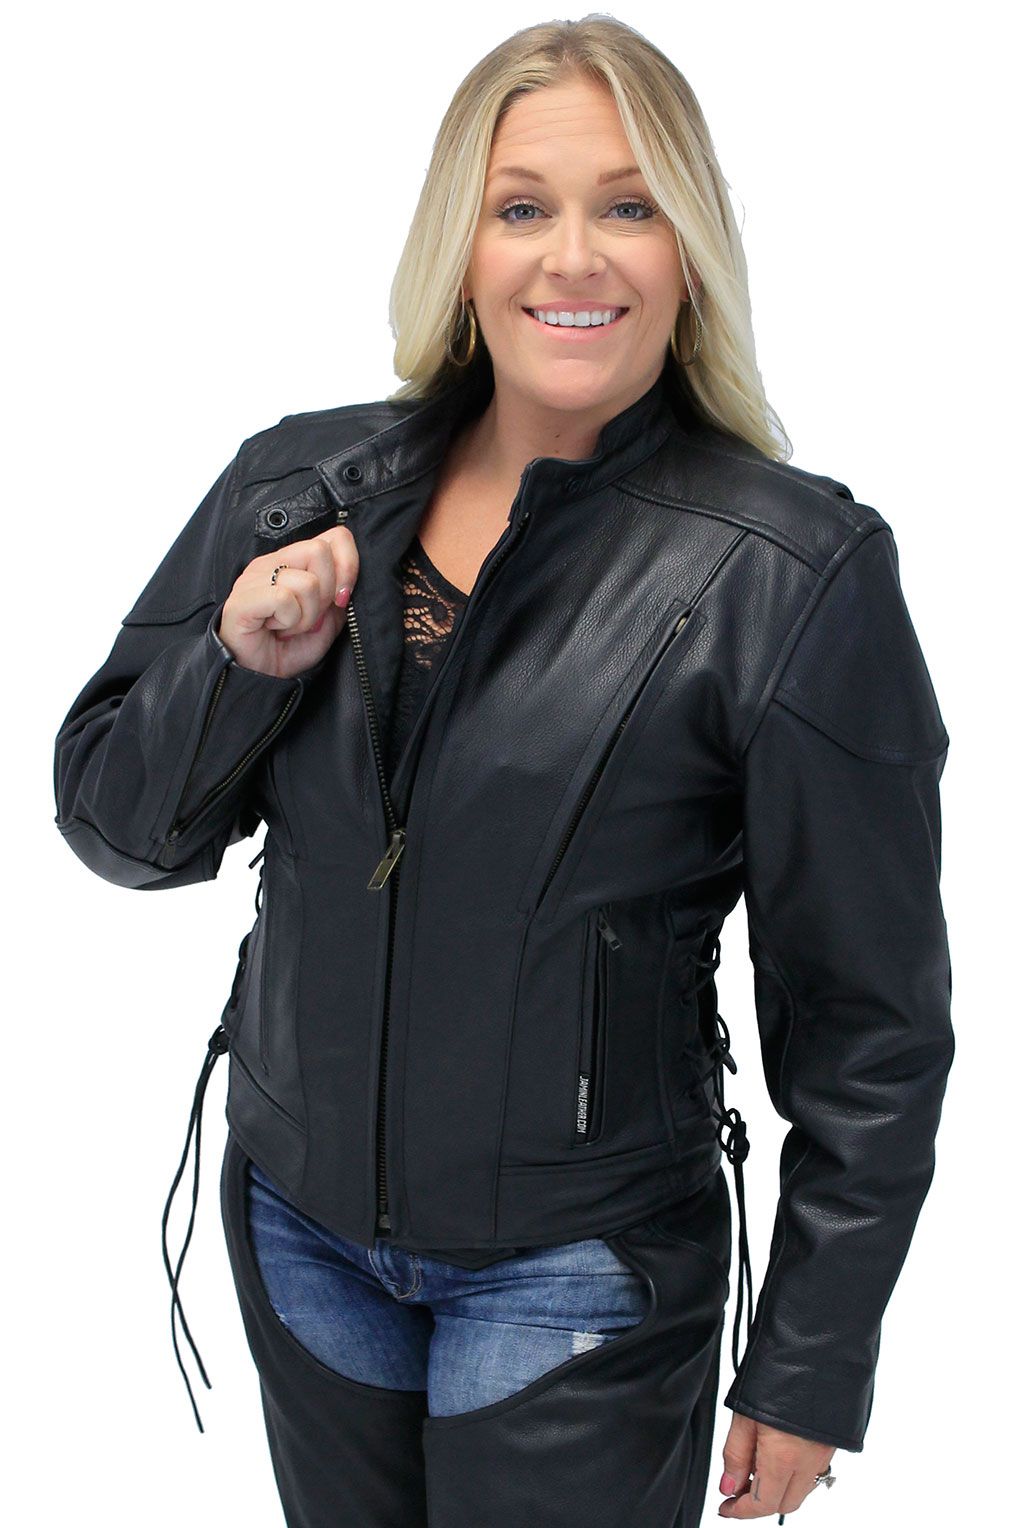 Vented women's leather motorcycle jacket with zip out lining.